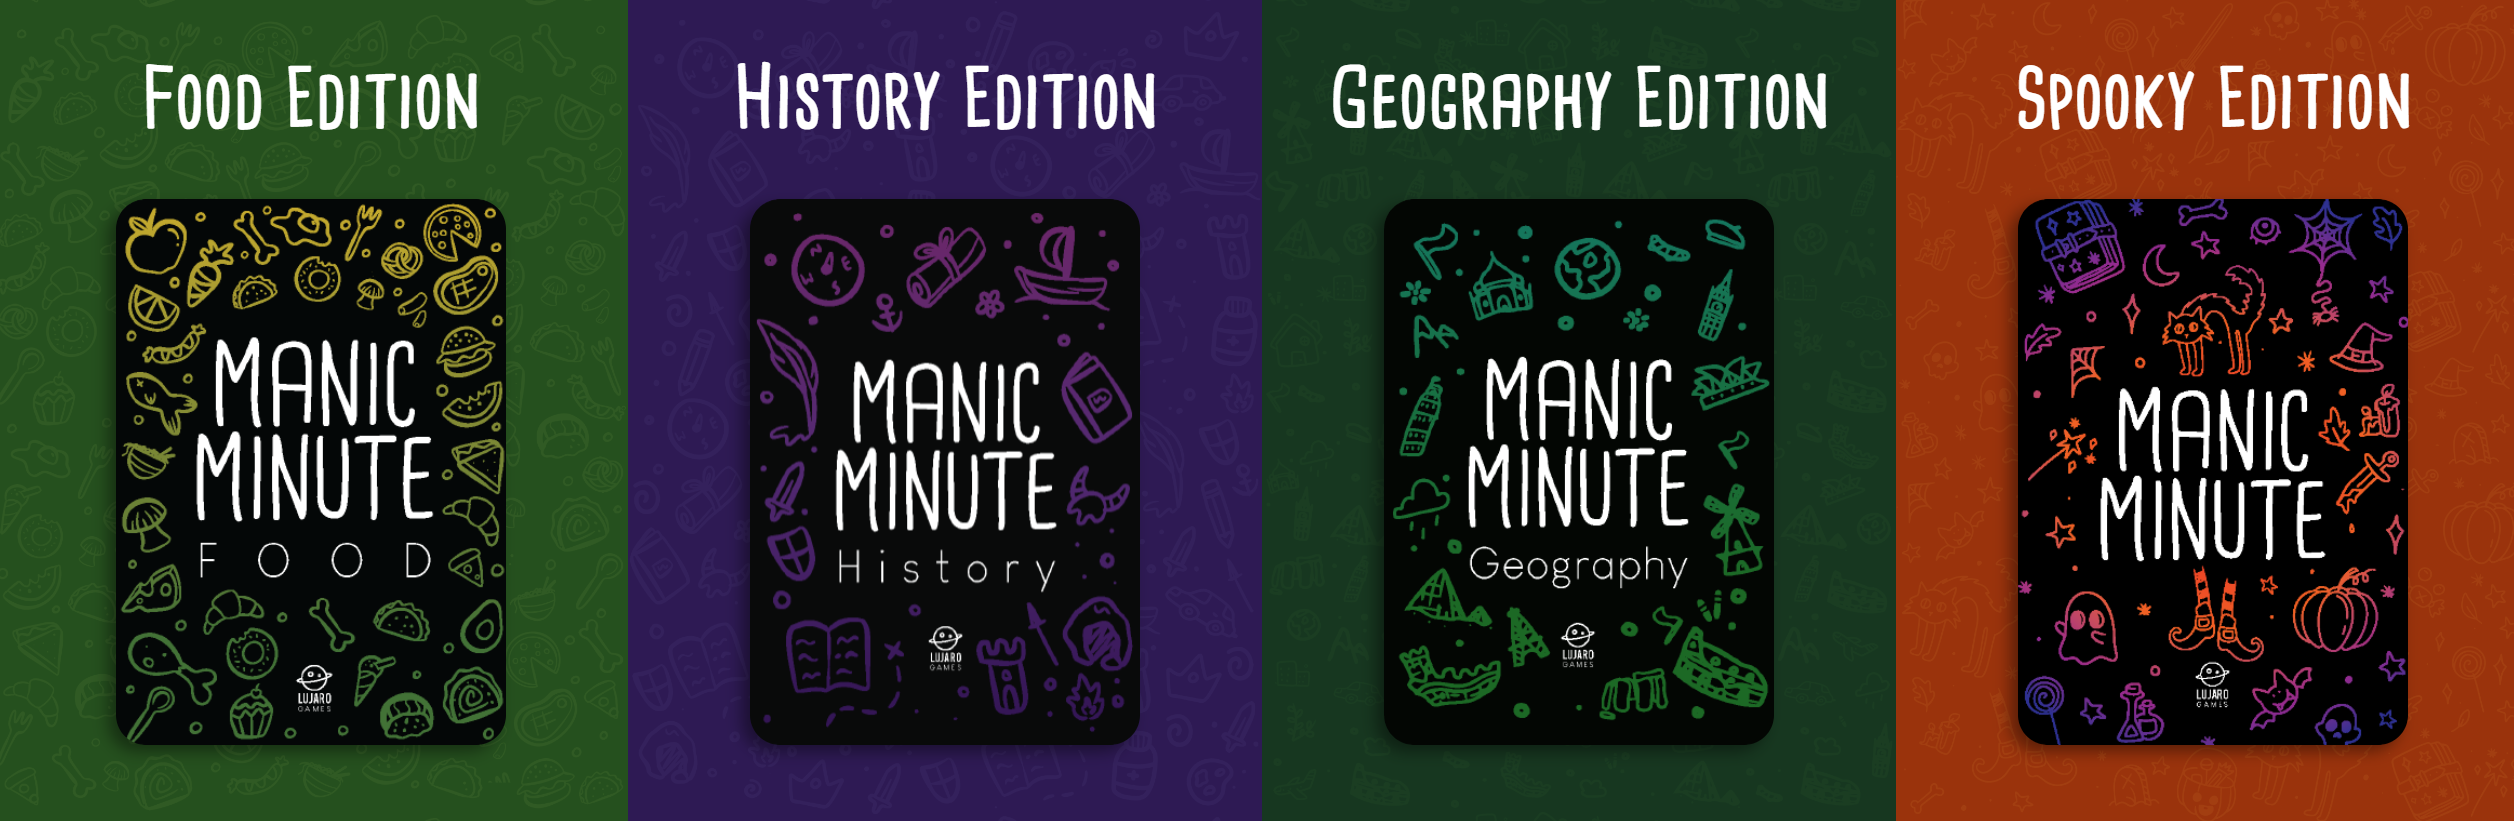 Manic Minute expansion packs: Food Edition, History Edition, Geographhy Edition and Spooky Edition